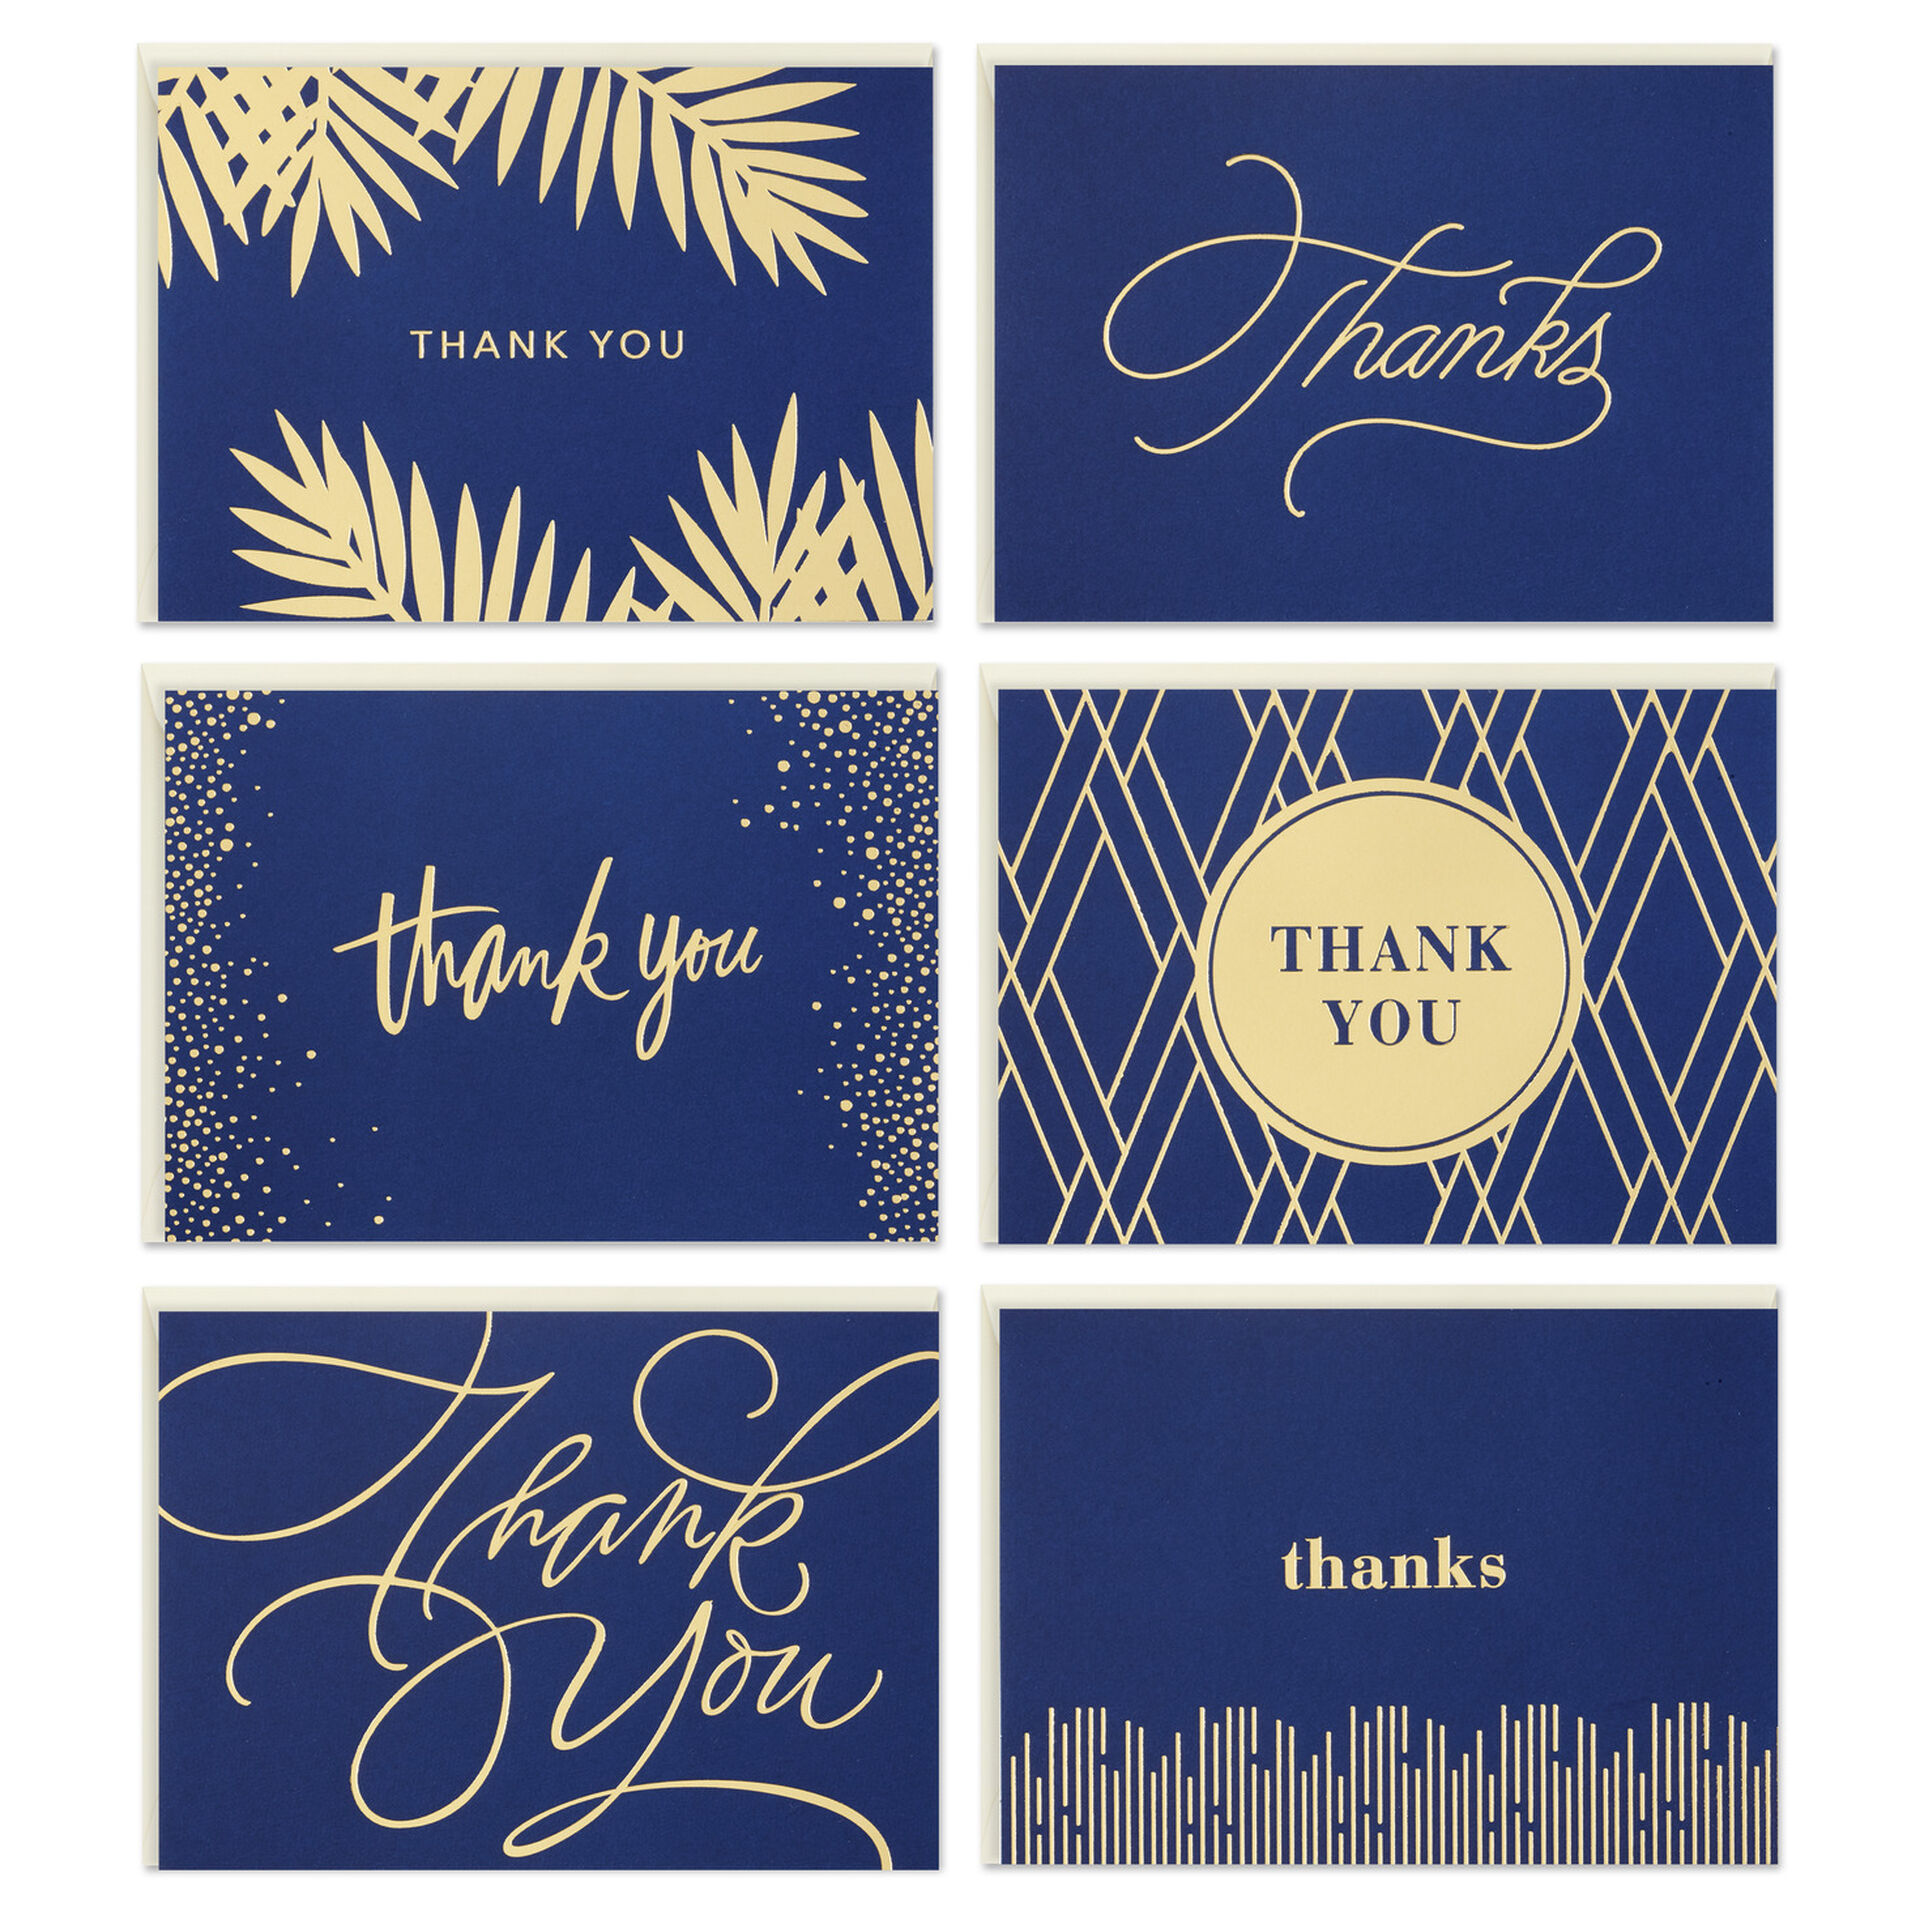 Navy-and-Gold-Assorted-Blank-ThankYou-Notes-Bulk-Pack_5STZ1064_02